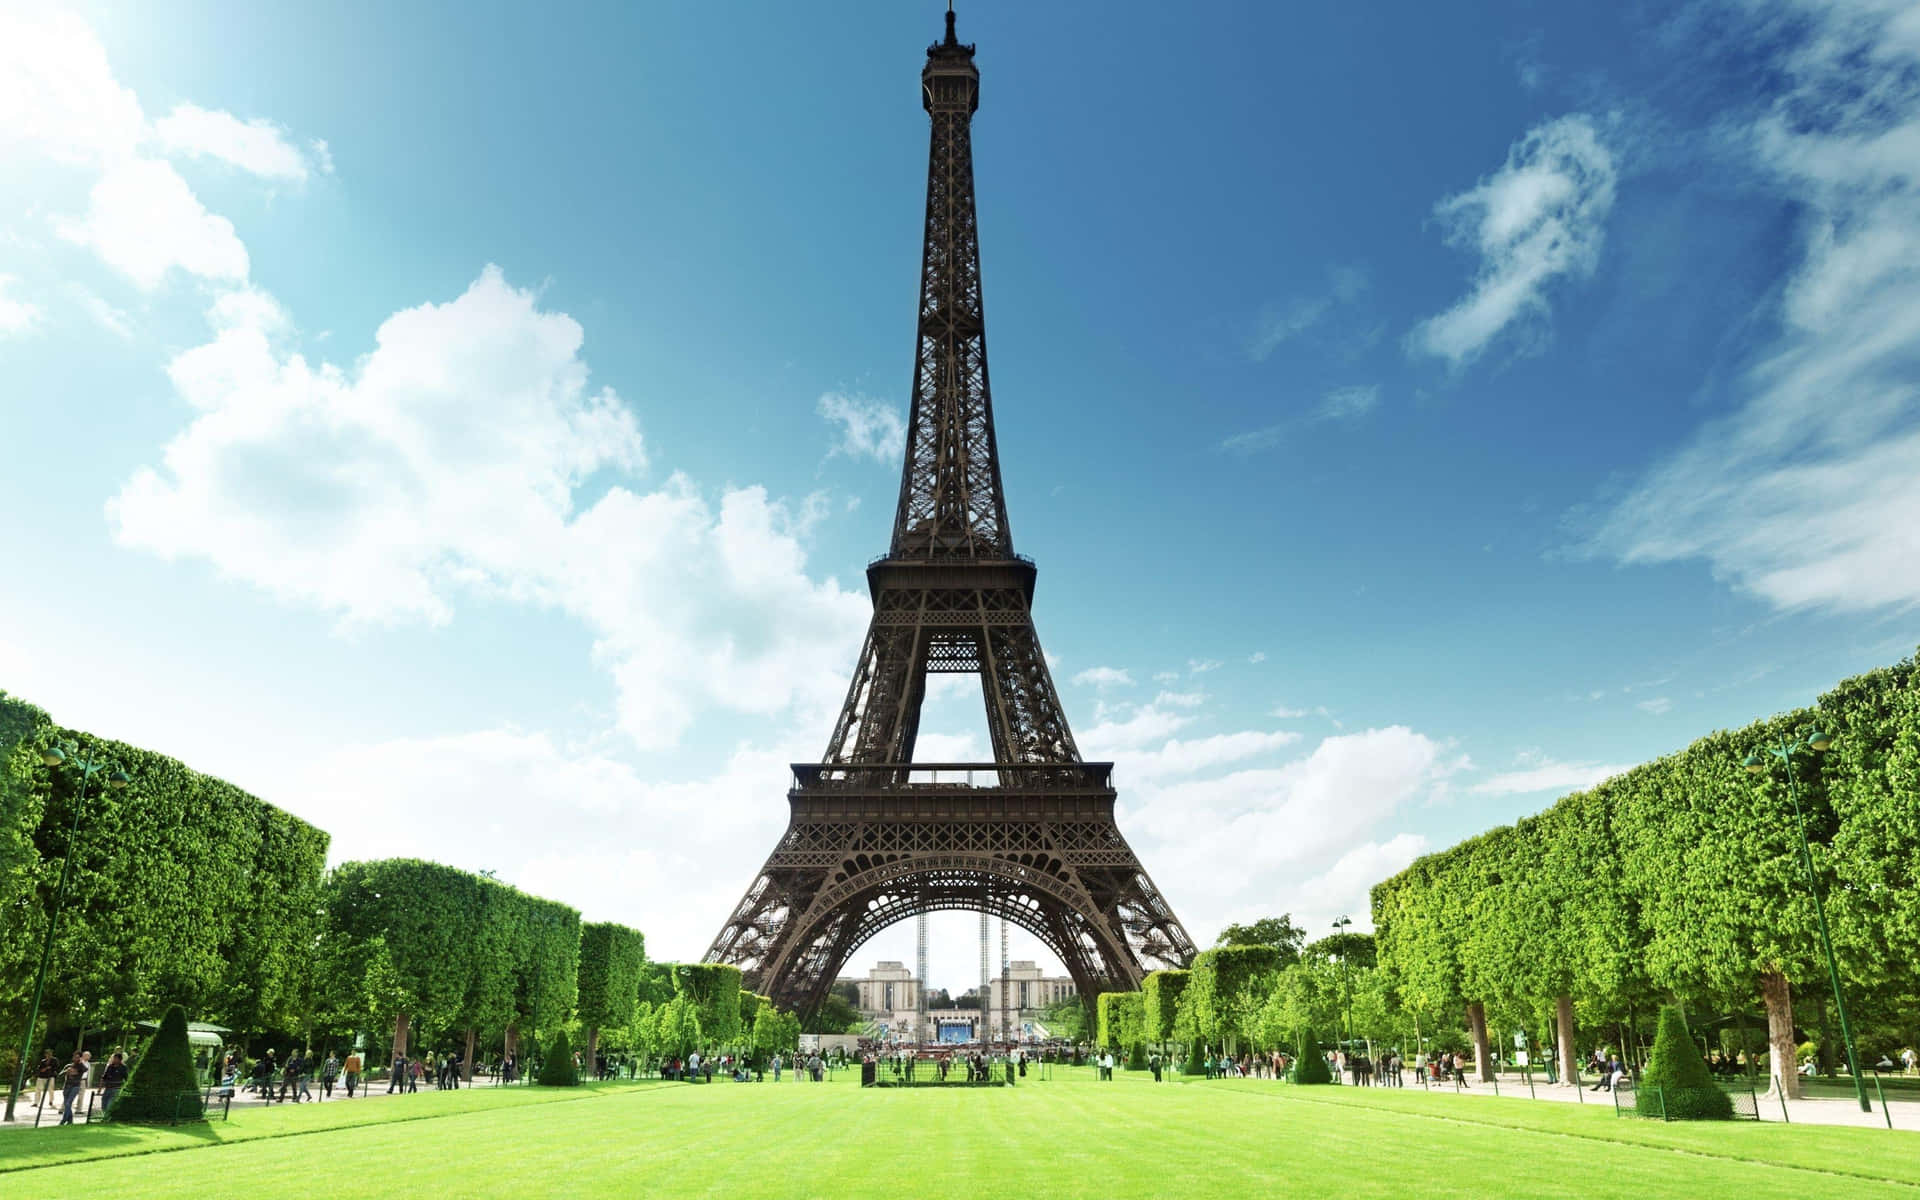 The beautiful Eiffel Tower standing in the heart of Paris